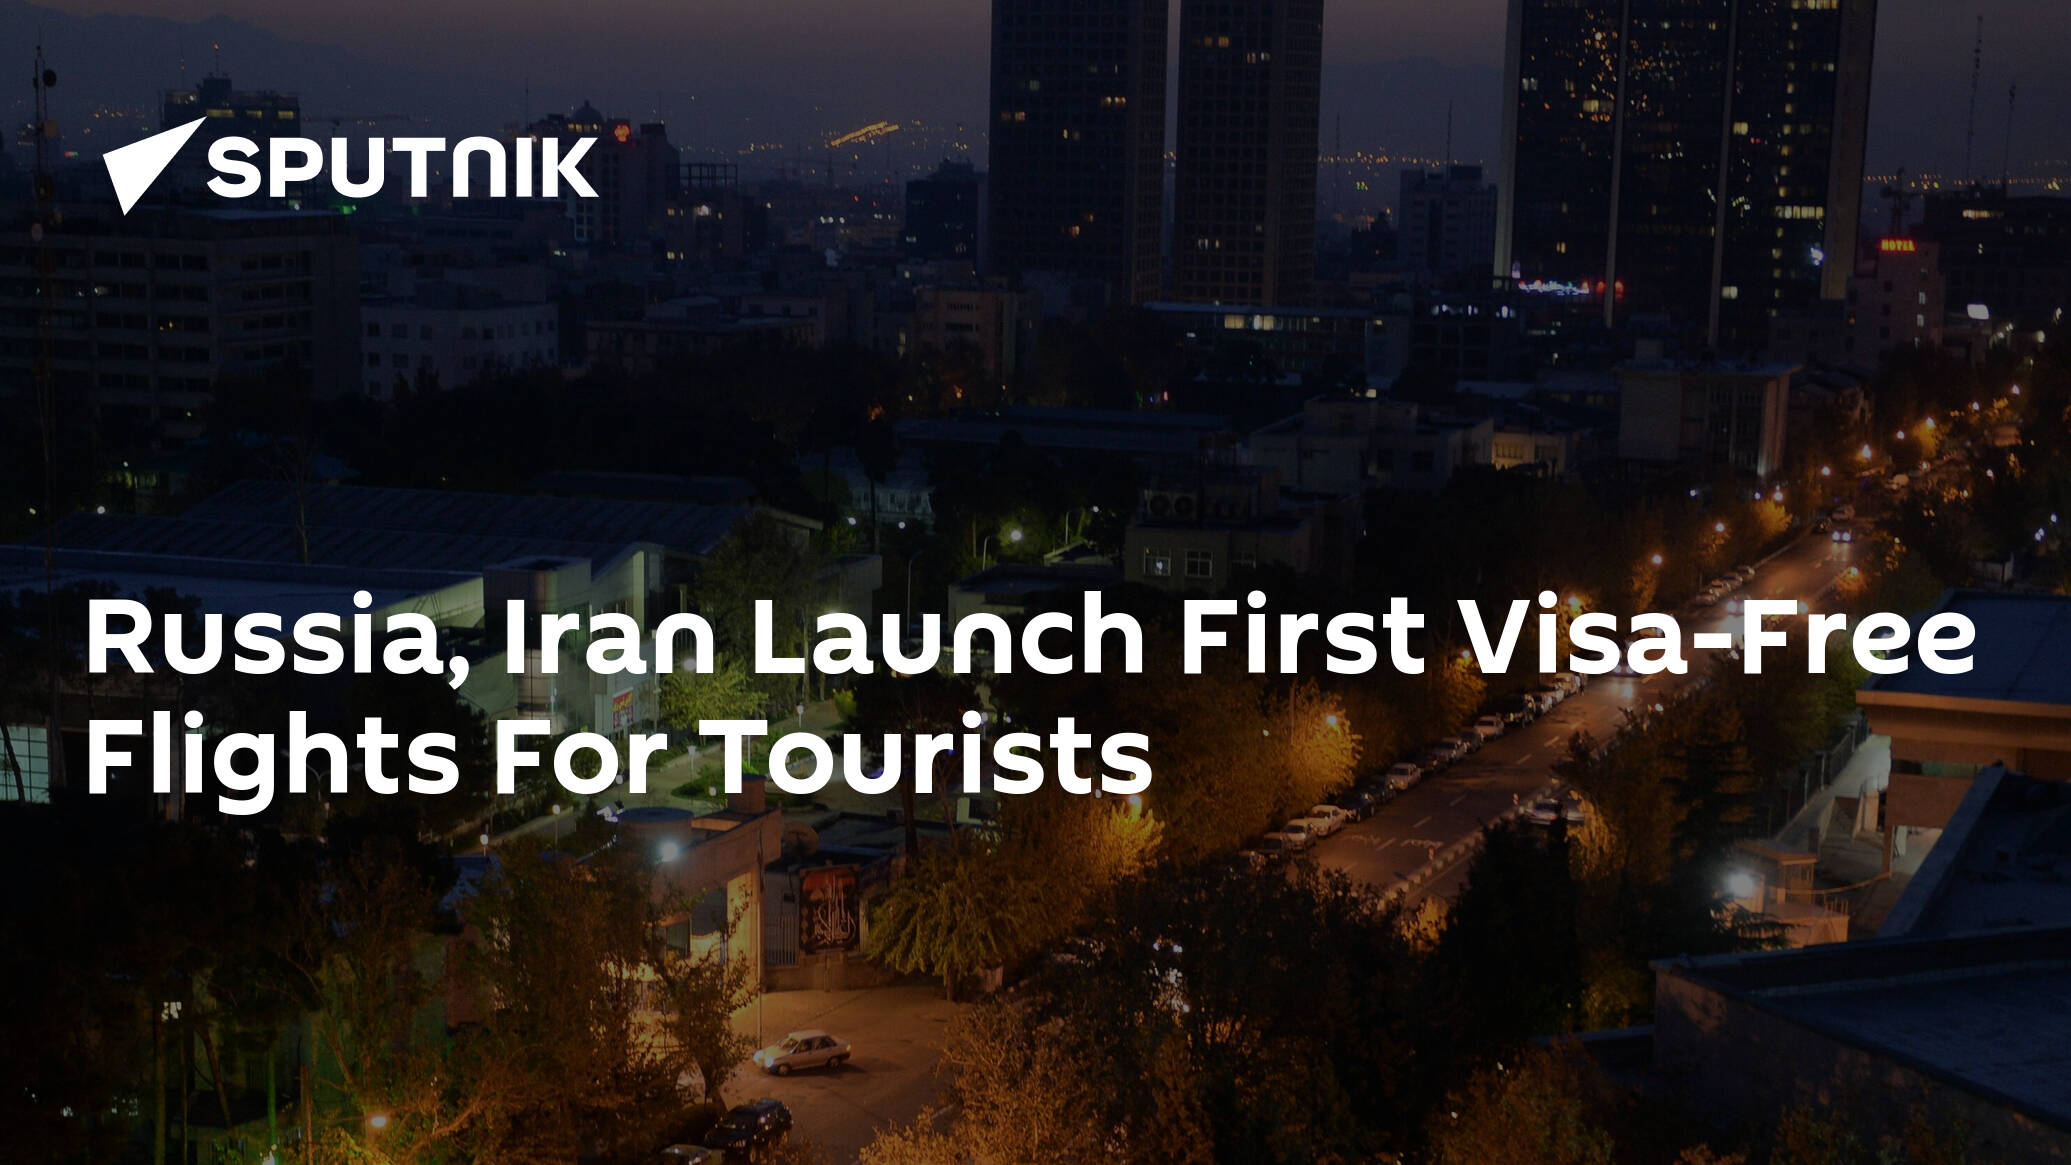 Russia, Iran Launch First Visa-Free Flights For Tourists